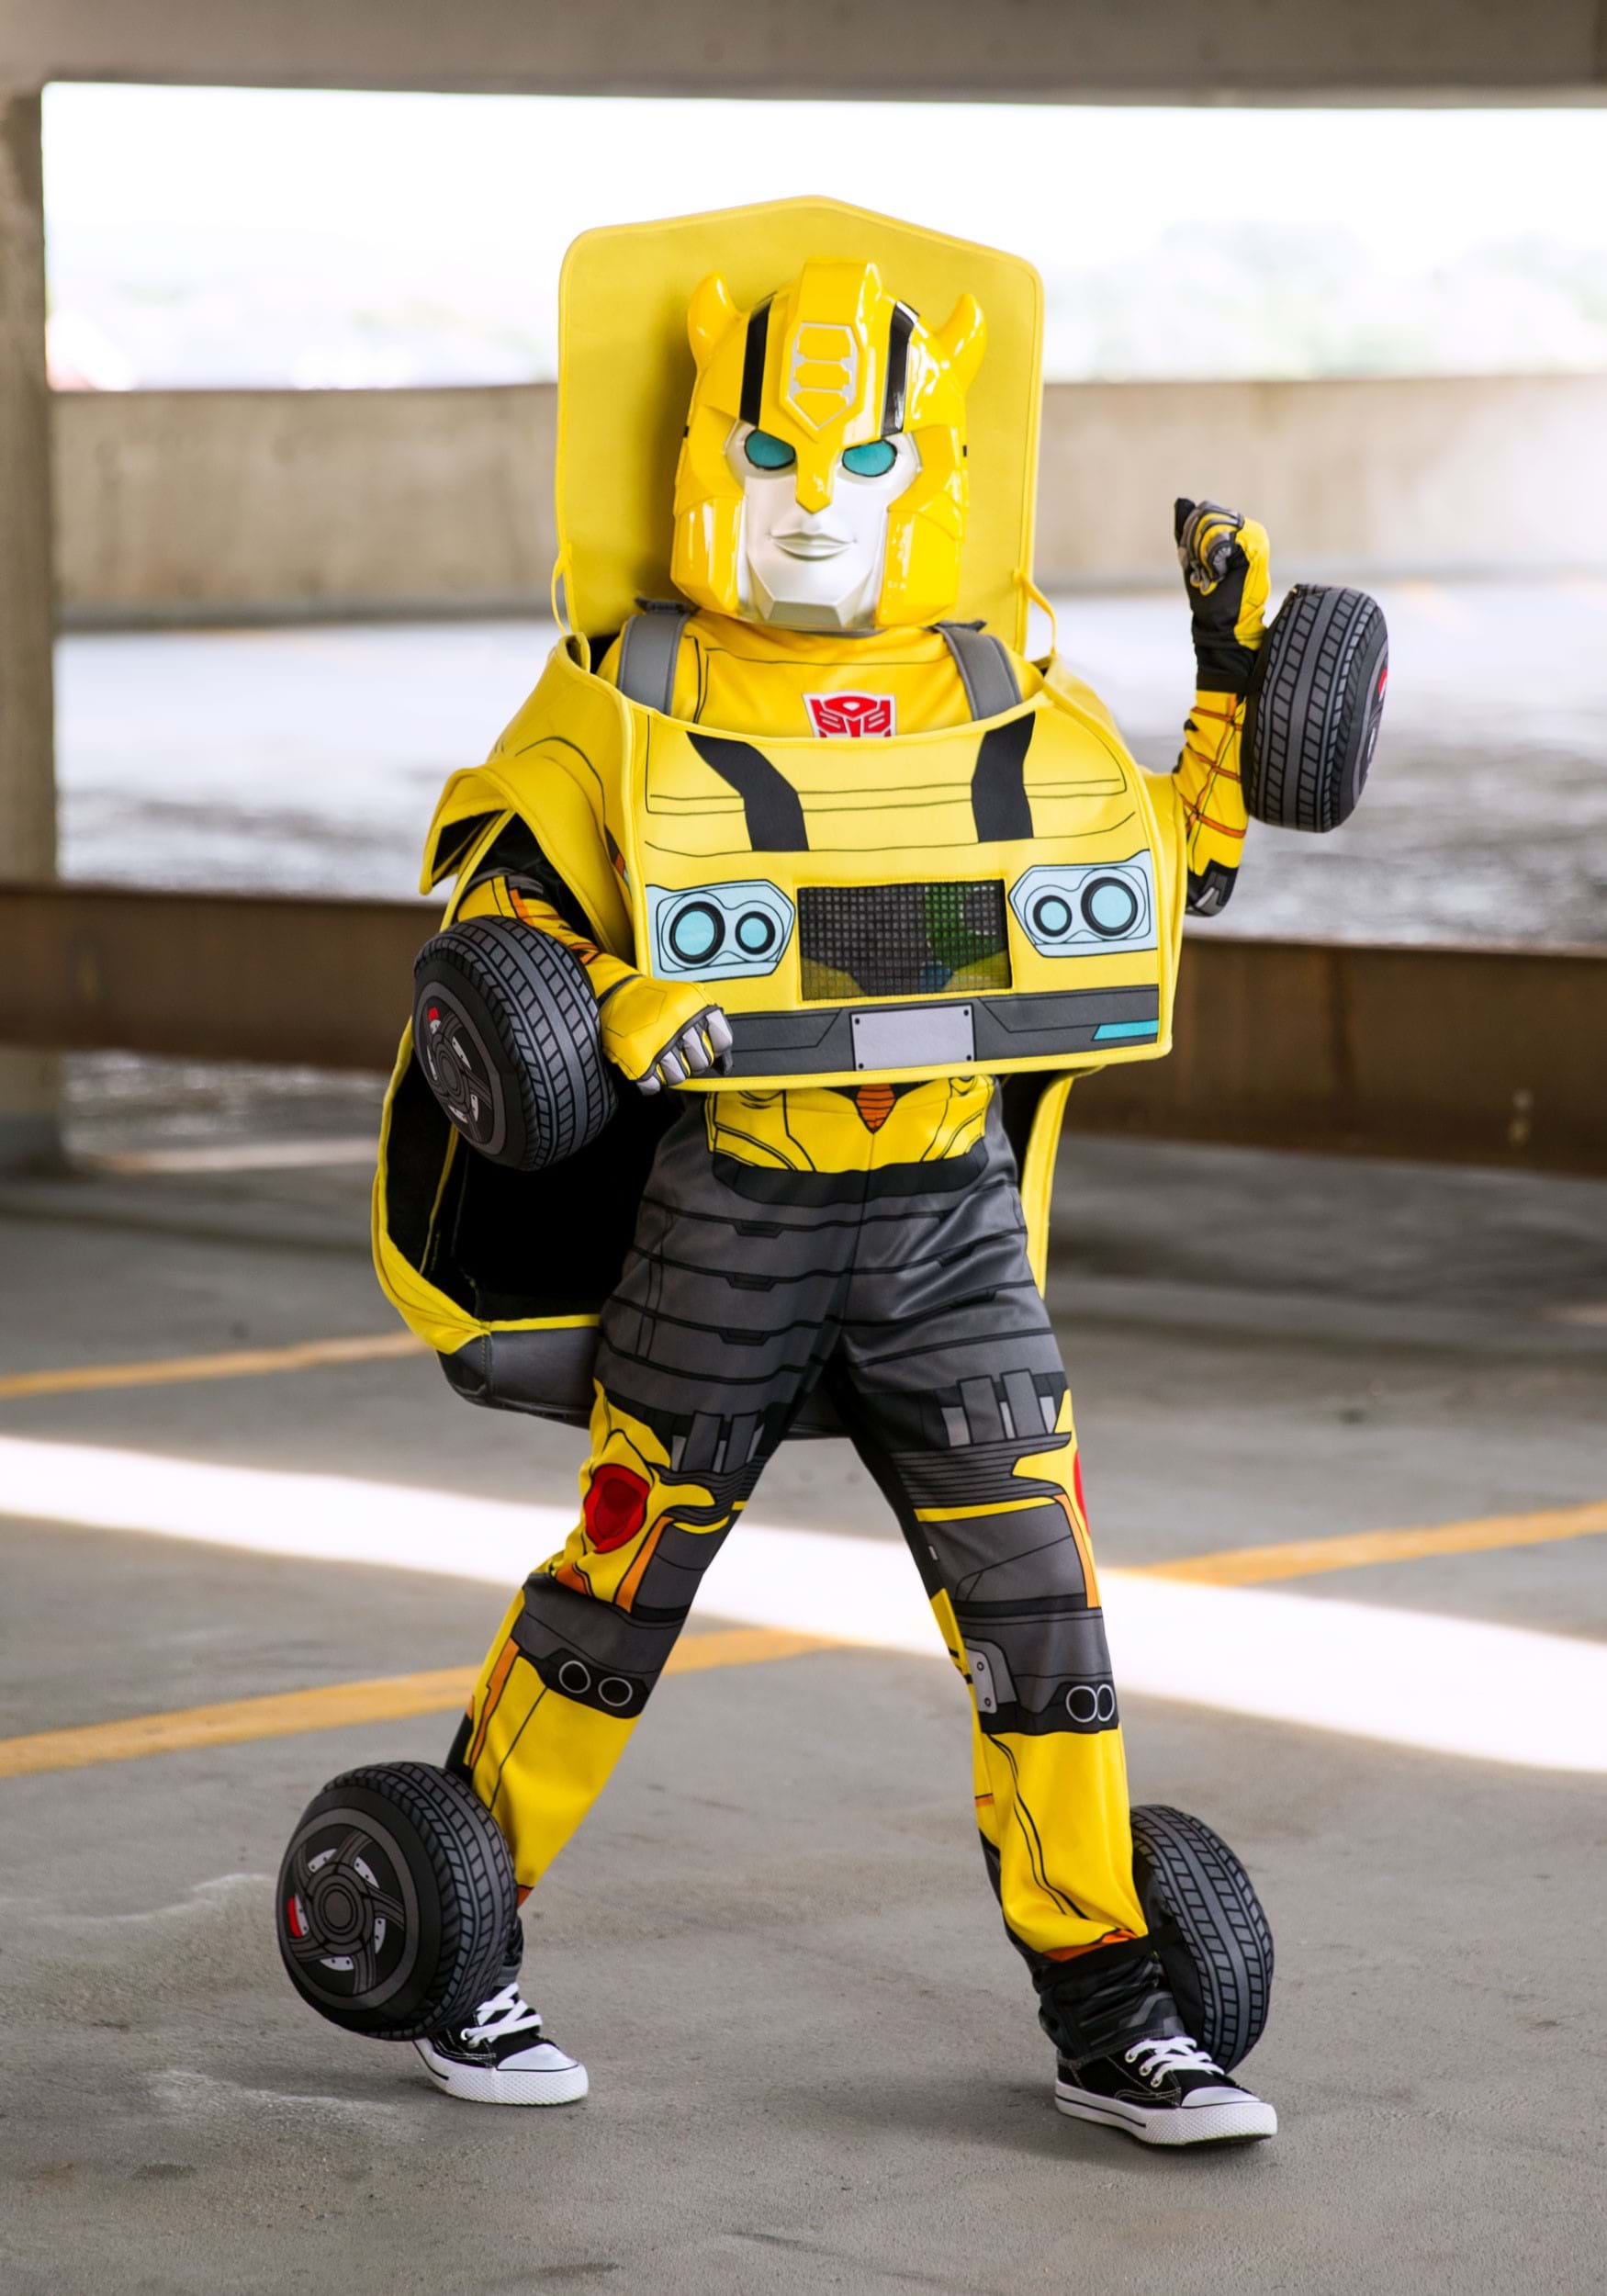 Child TRANSFORMERS Fancy Dress Costumes Optimus Prime Bumblebee Classic Deluxe